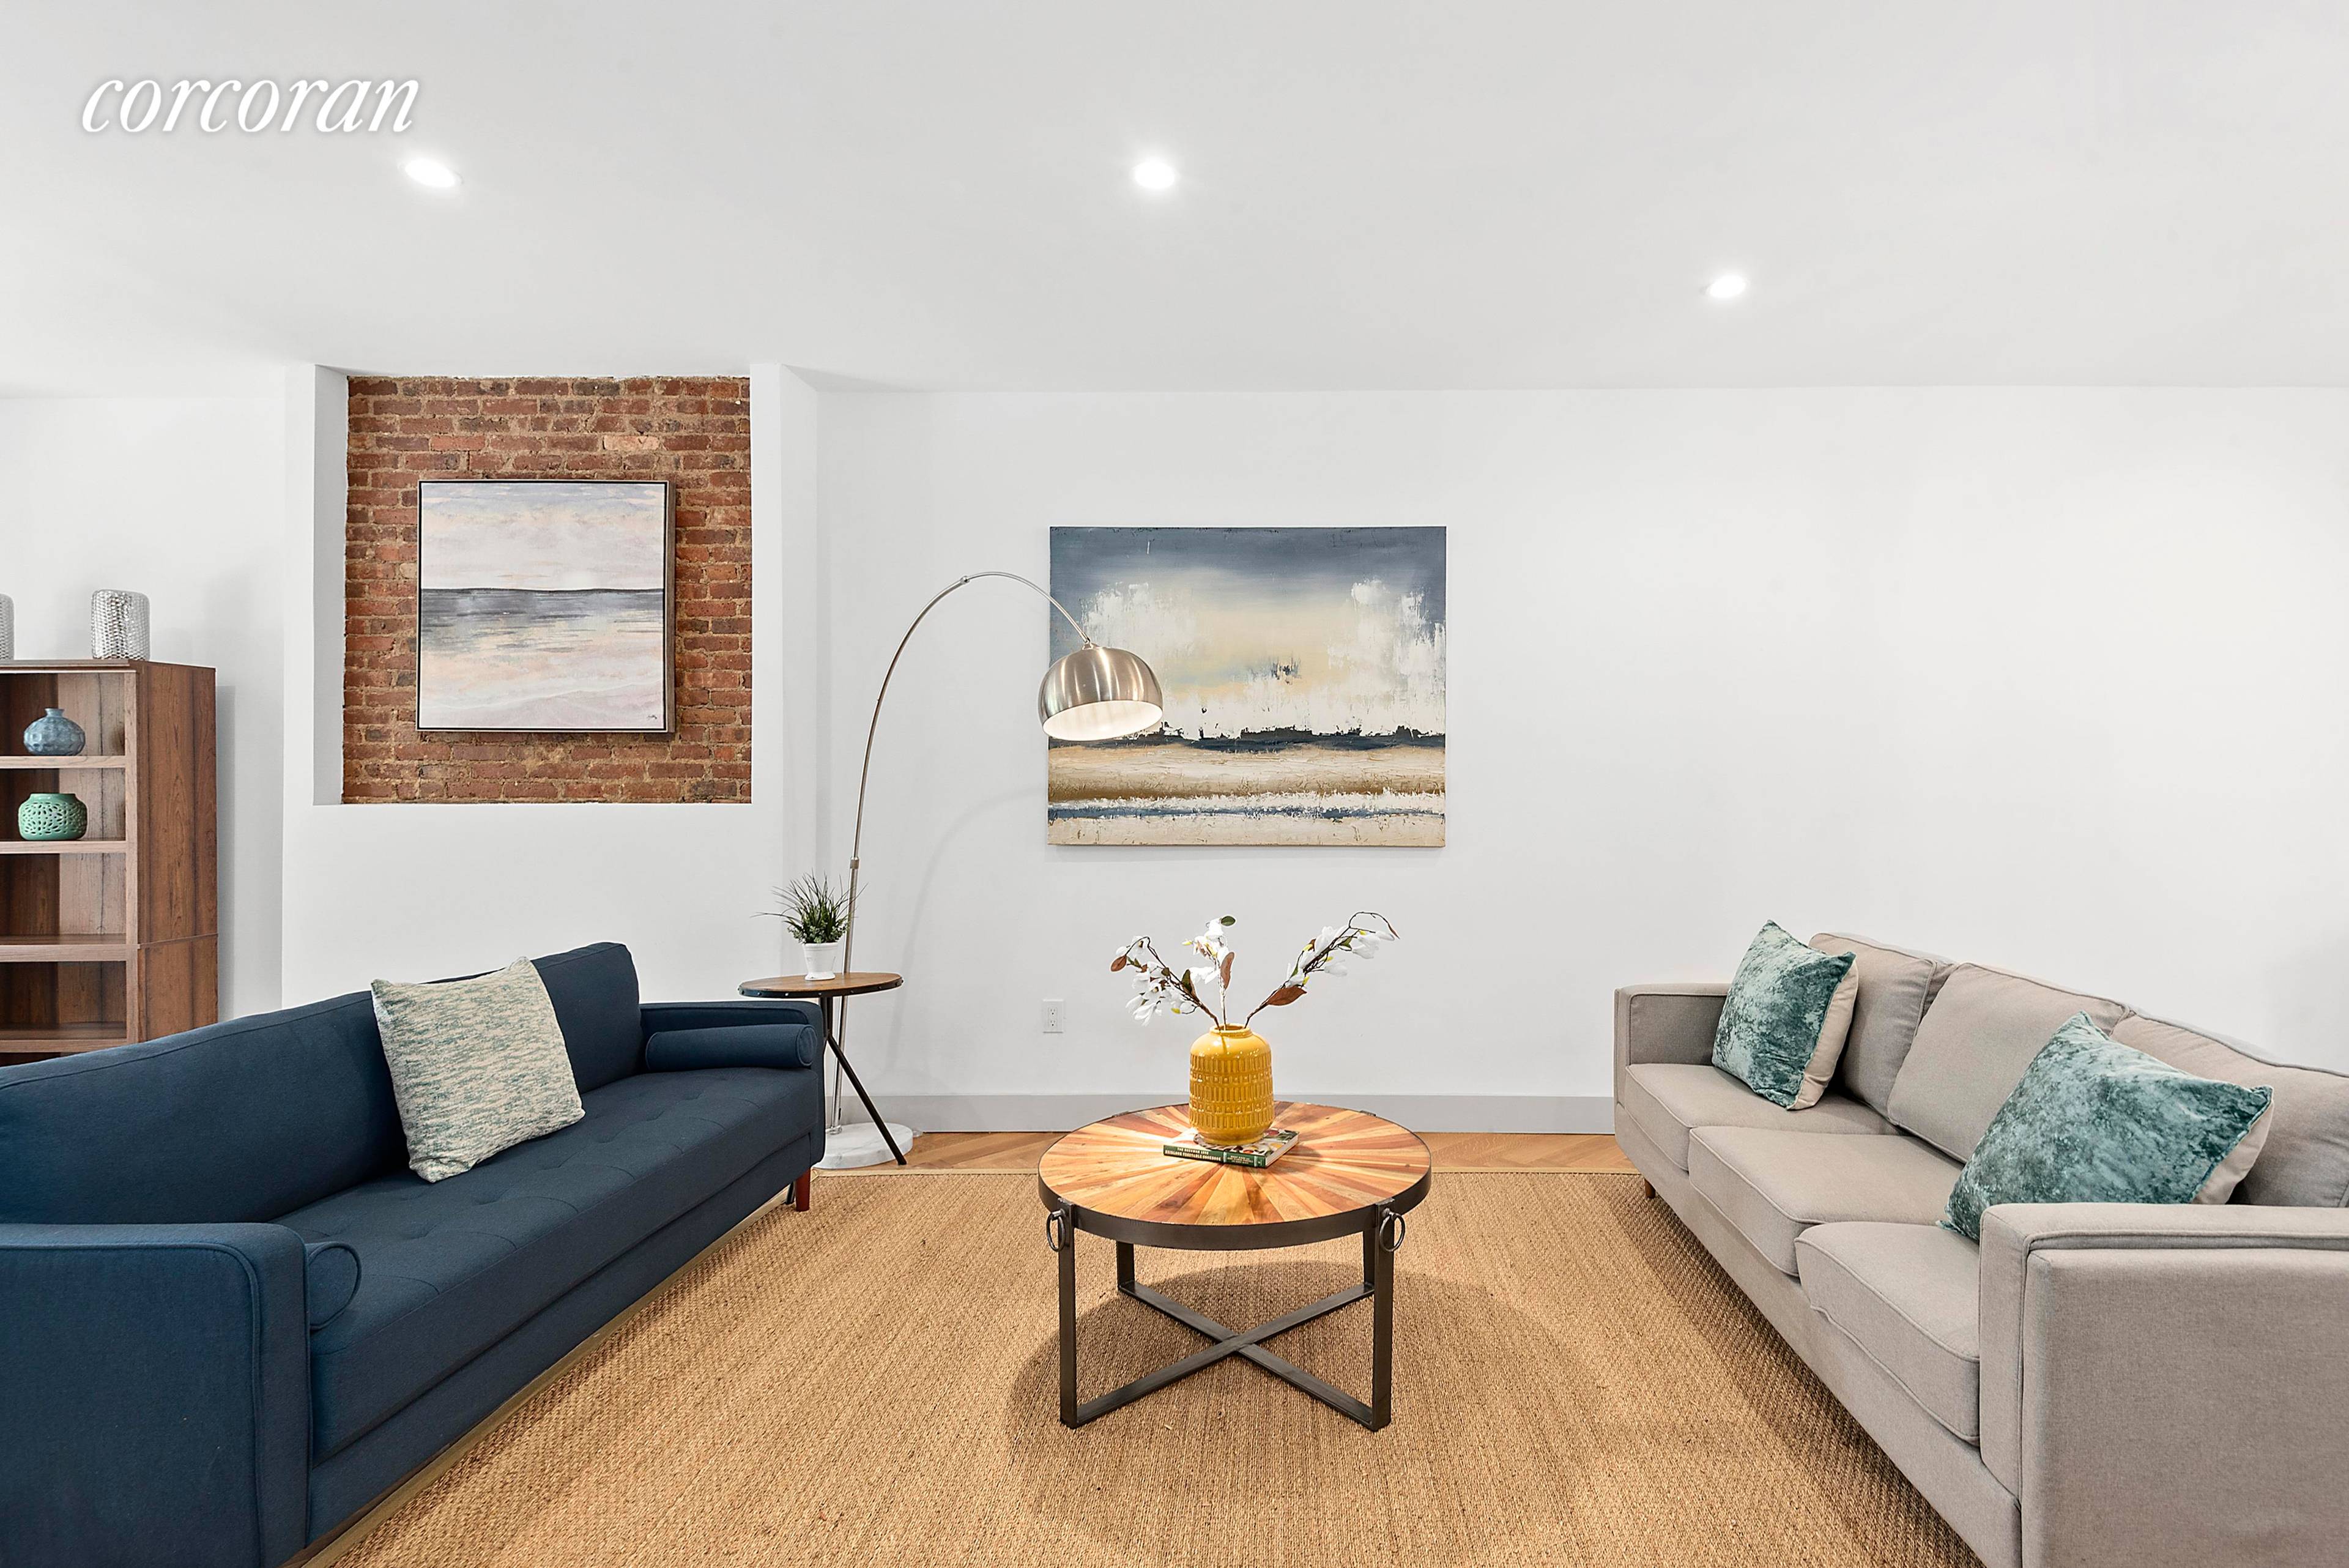 677 Decatur Street is a newly renovated 20 foot wide two family townhome with a private backyard on a tree lined block in Bed Stuy.